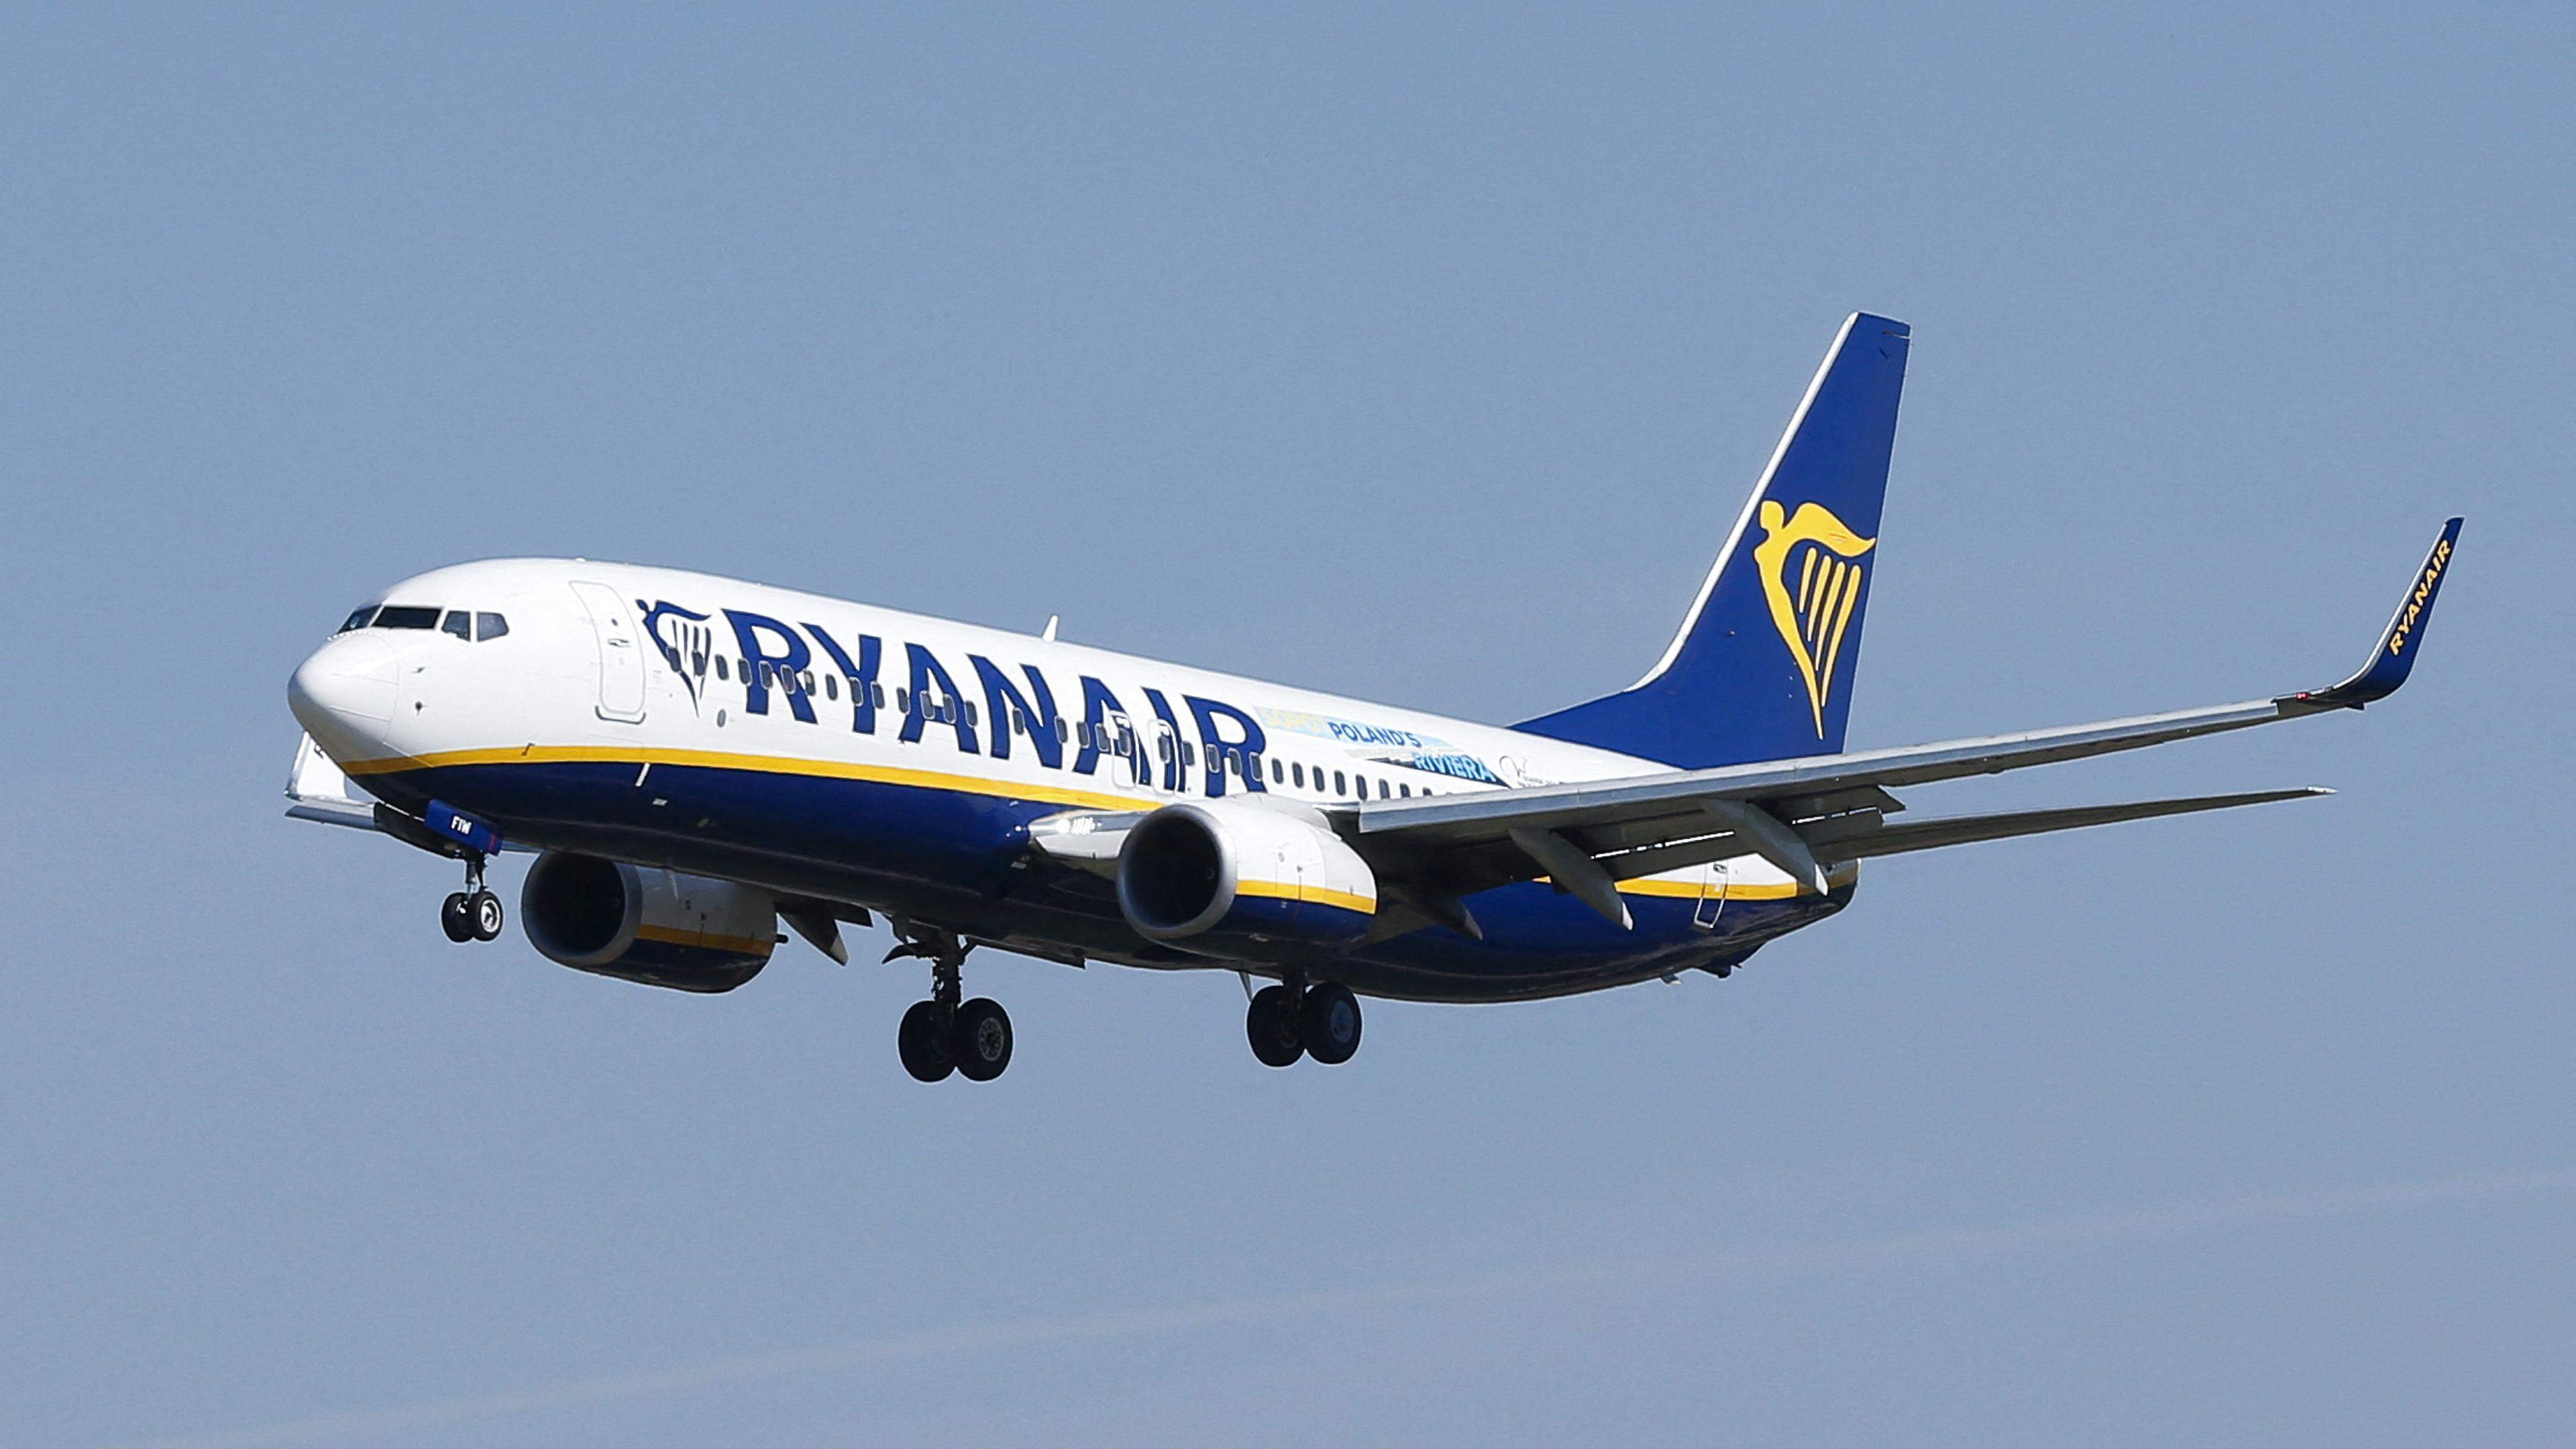 (FILES) In this file photo taken on September 28, 2018 a Ryanair Boeing 737-800 aircraft lands at Barcelona's 'El Prat' airport. - Ryanair is to delist from the London Stock Exchange next month, the Irish no-frills airline announced Friday, owing to high costs and falling trade volumes after London exited the European Union. (Photo by PAU BARRENA / AFP)